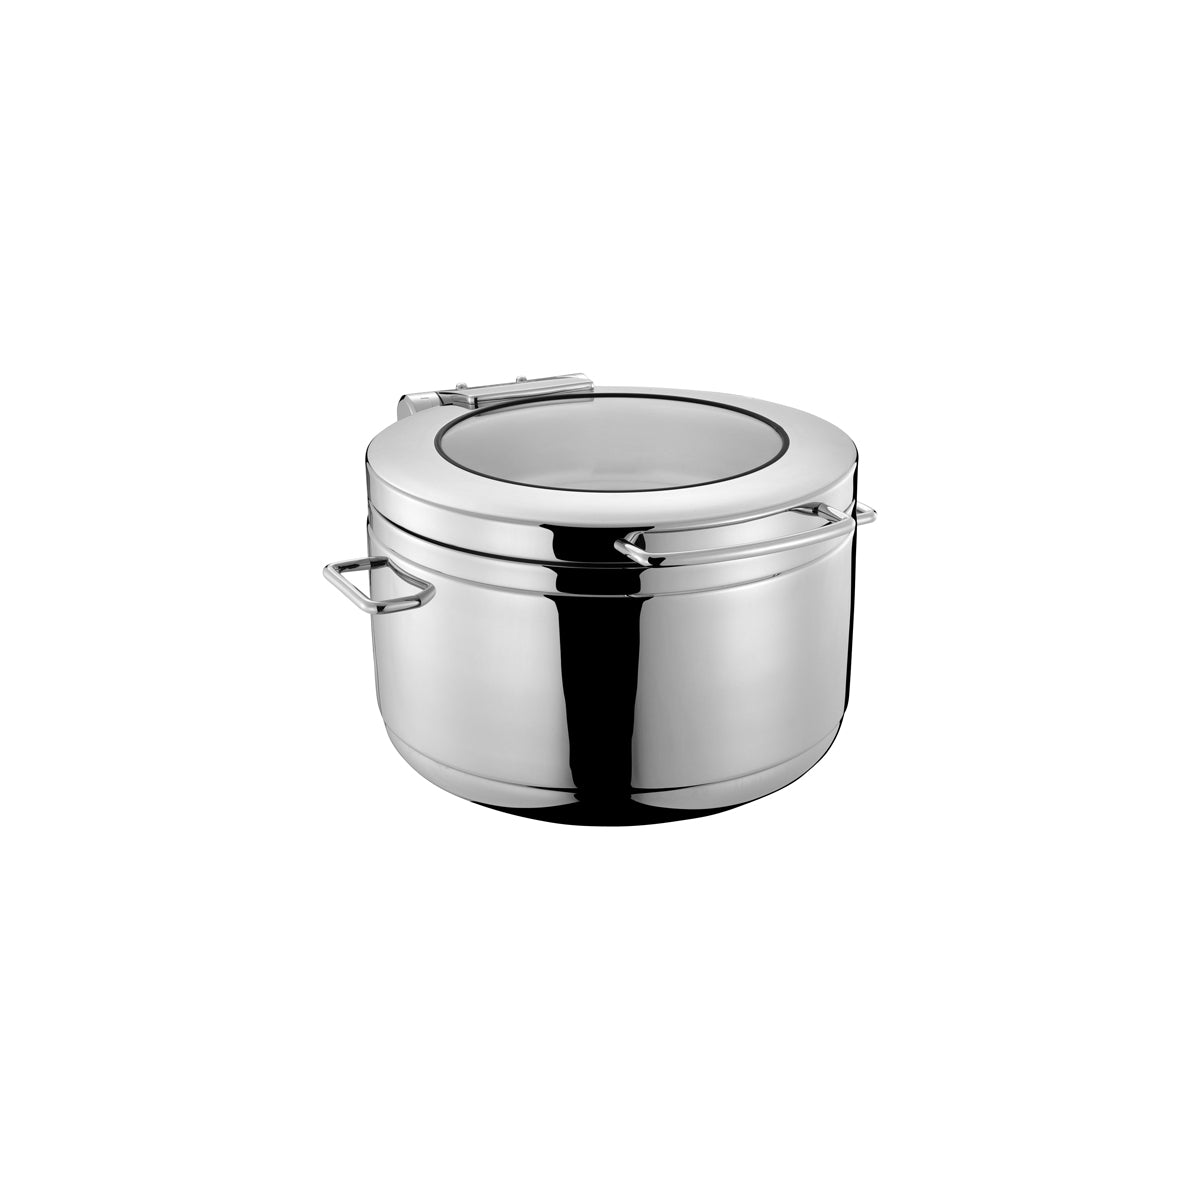 54909 Chef Inox Induction Soup Station 18/8 Stainless Steel 11Lt with Glass Lid Tomkin Australia Hospitality Supplies